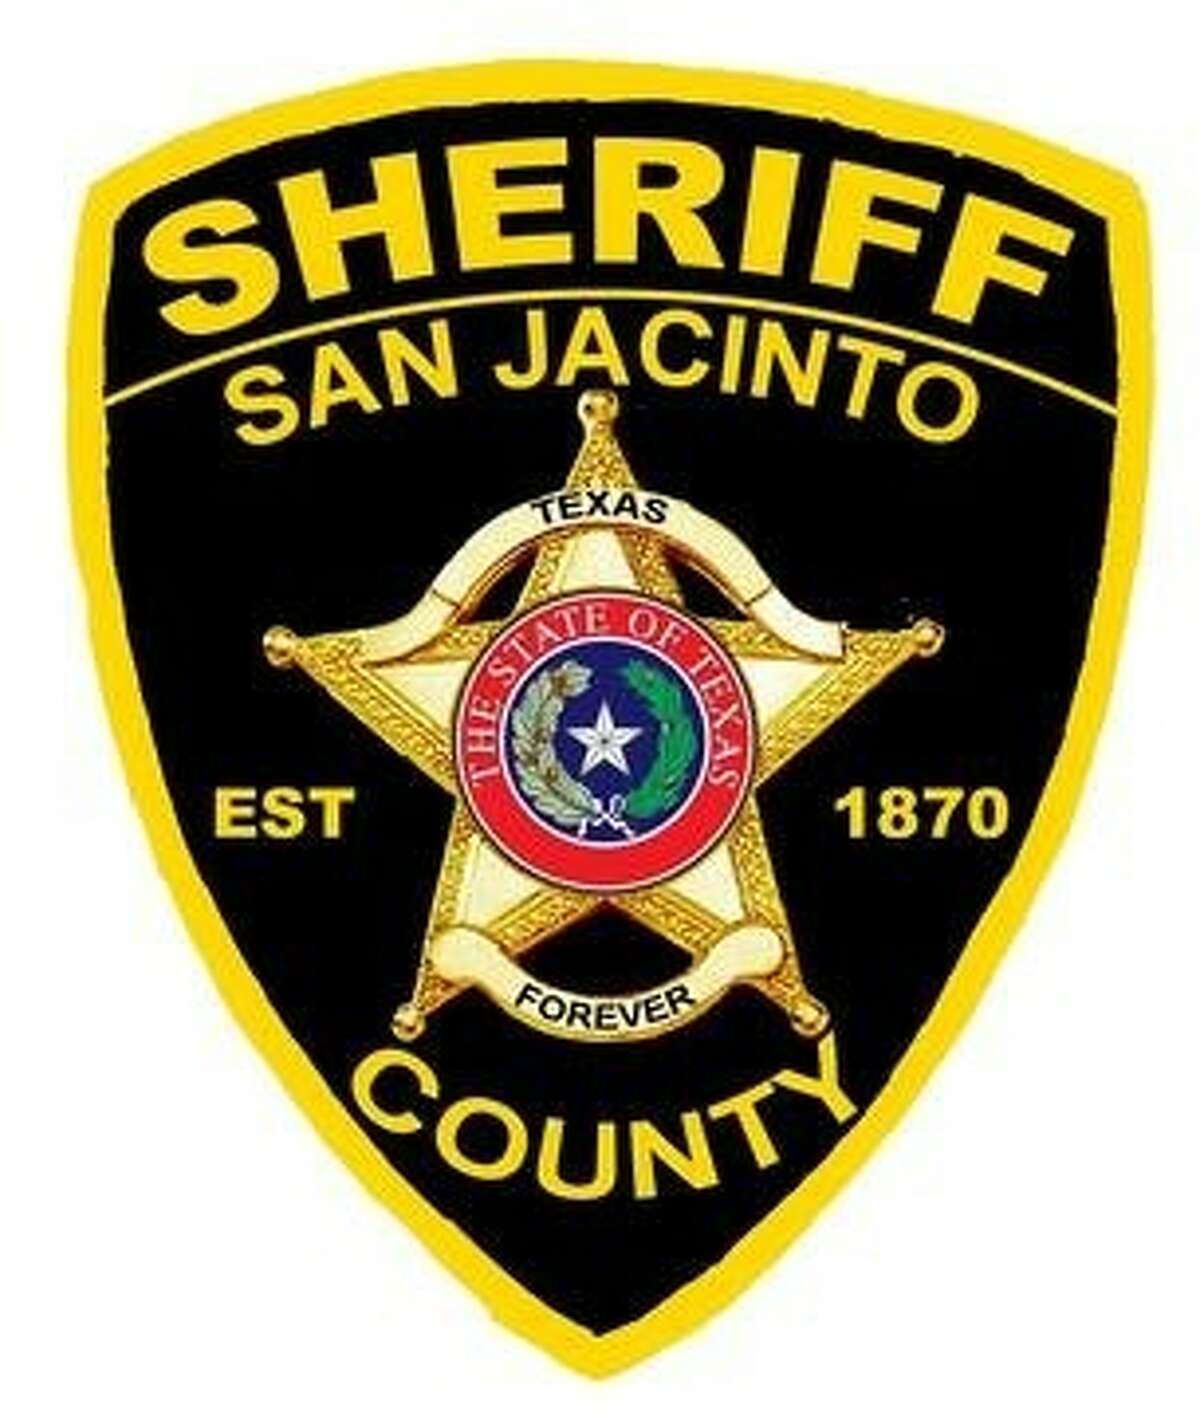 The Jail Division of the San Jacinto County Sheriff’s Office reported 12 arrests from Monday, Aug. 29 through Wednesday, August 31, 2011.